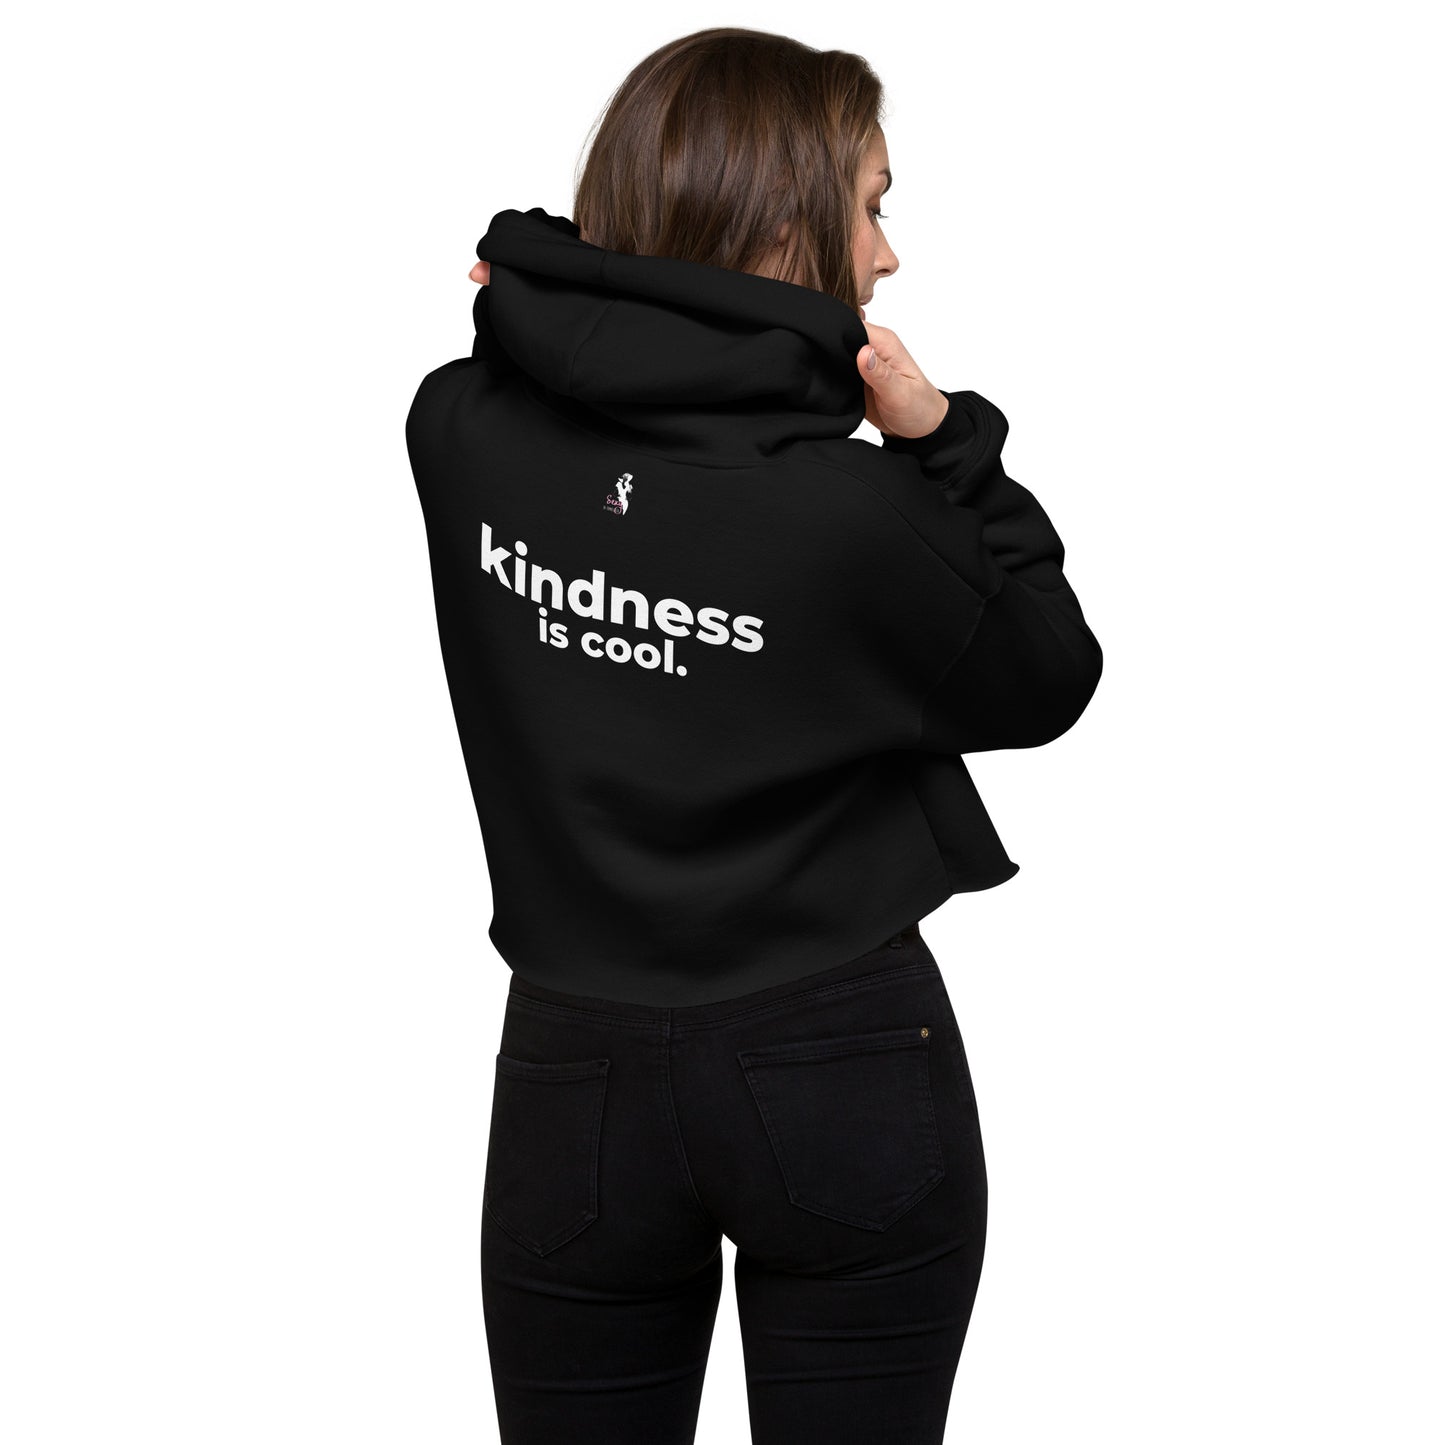 Kindness is Cool - Back message Crop Hoodie